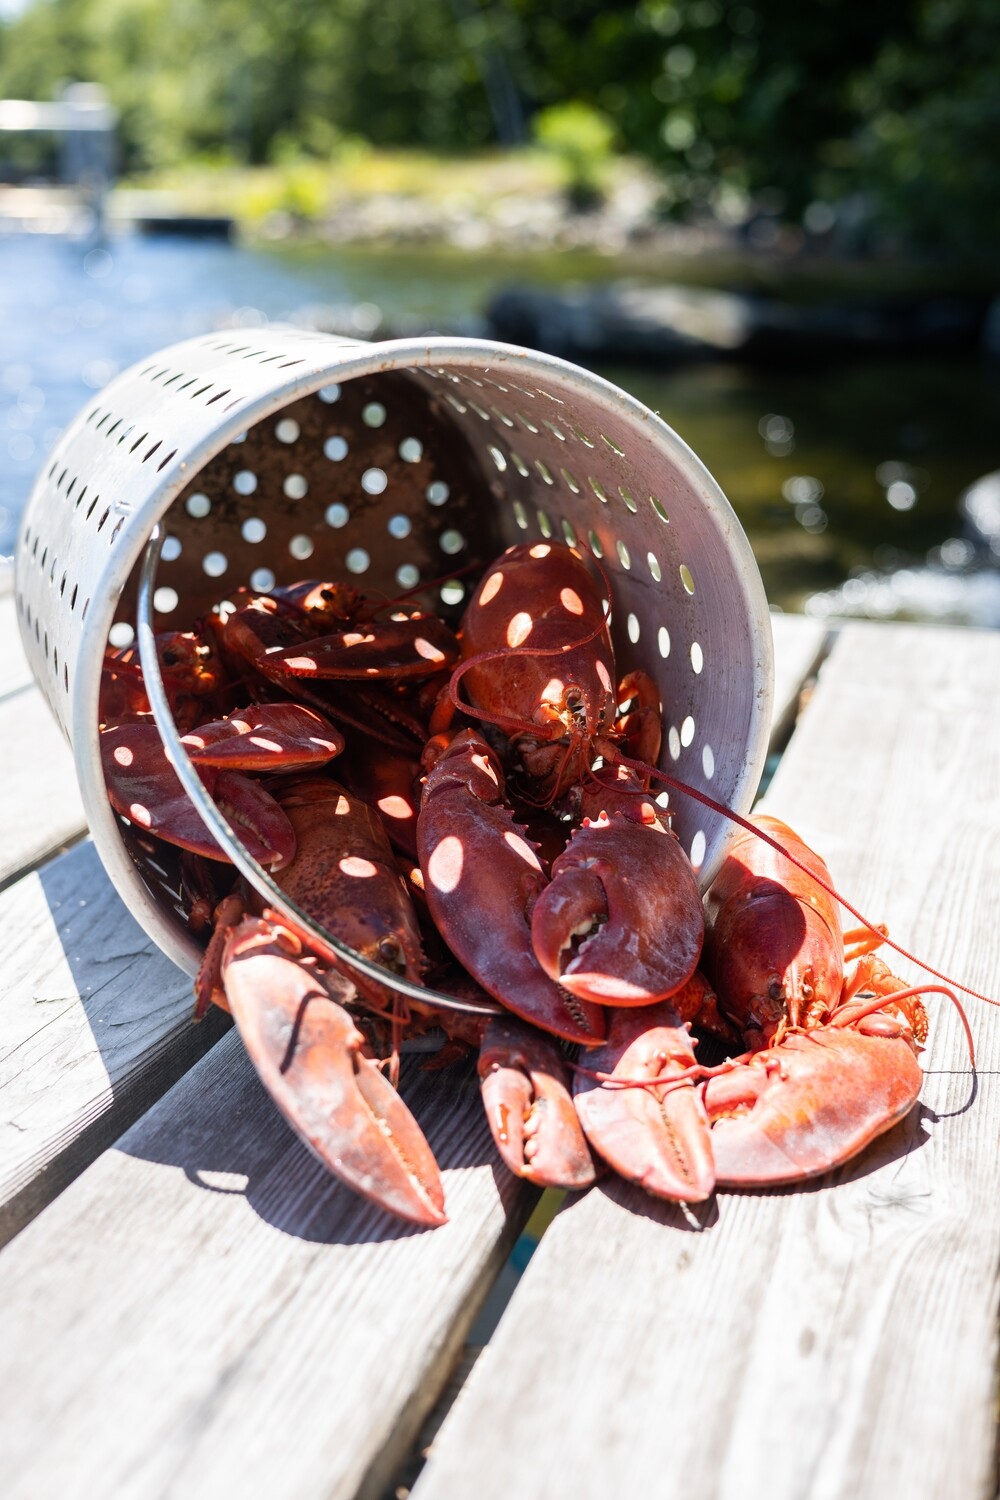 8 Live Maine Lobsters